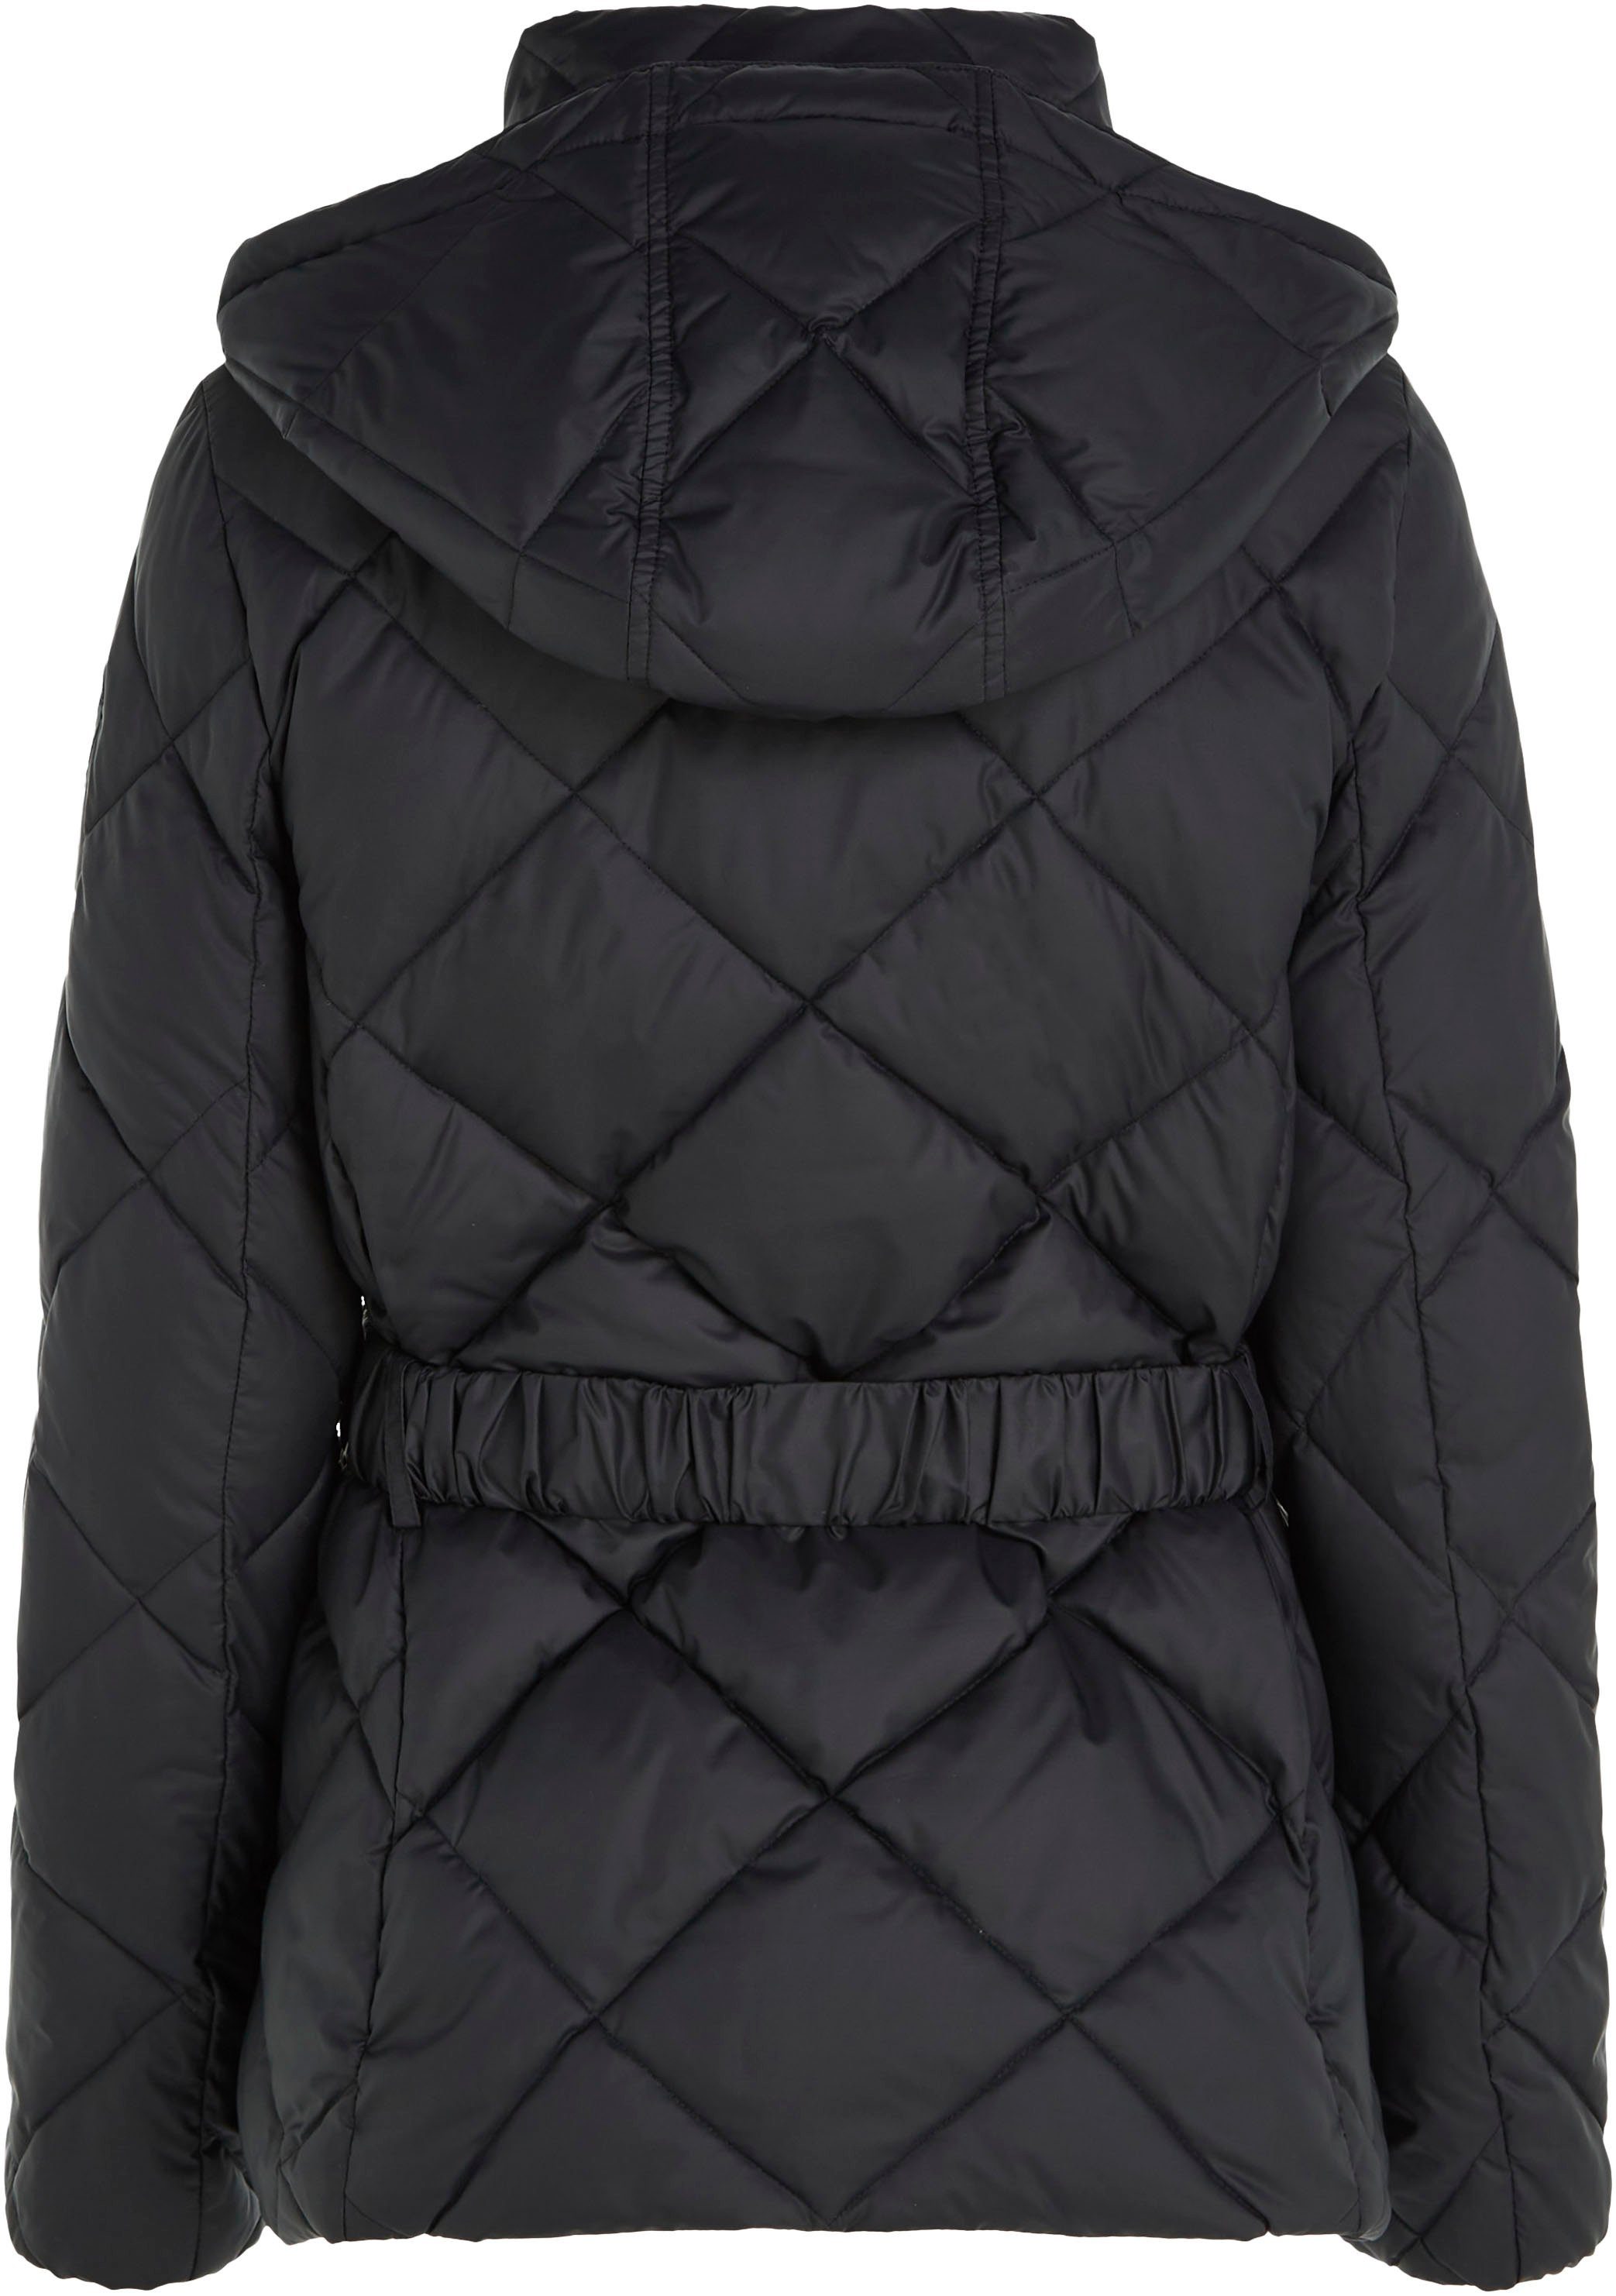 Tommy Hilfiger Steppjacke JACKET Logostickerei QUILTED BELTED ELEVATED mit